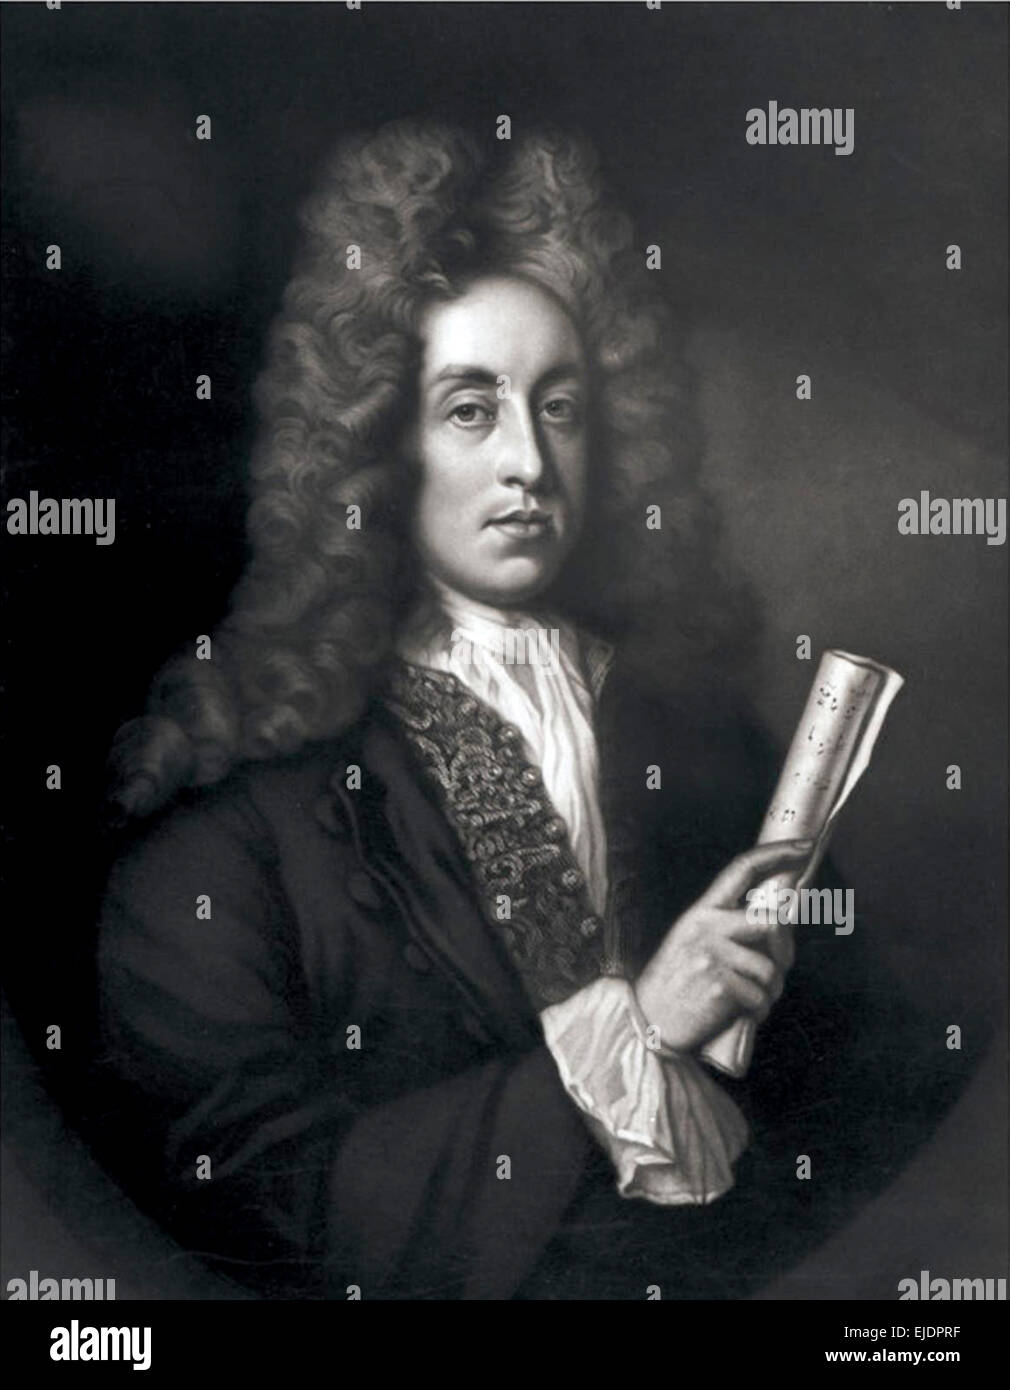 Henry Purcell, compositore inglese. Foto Stock